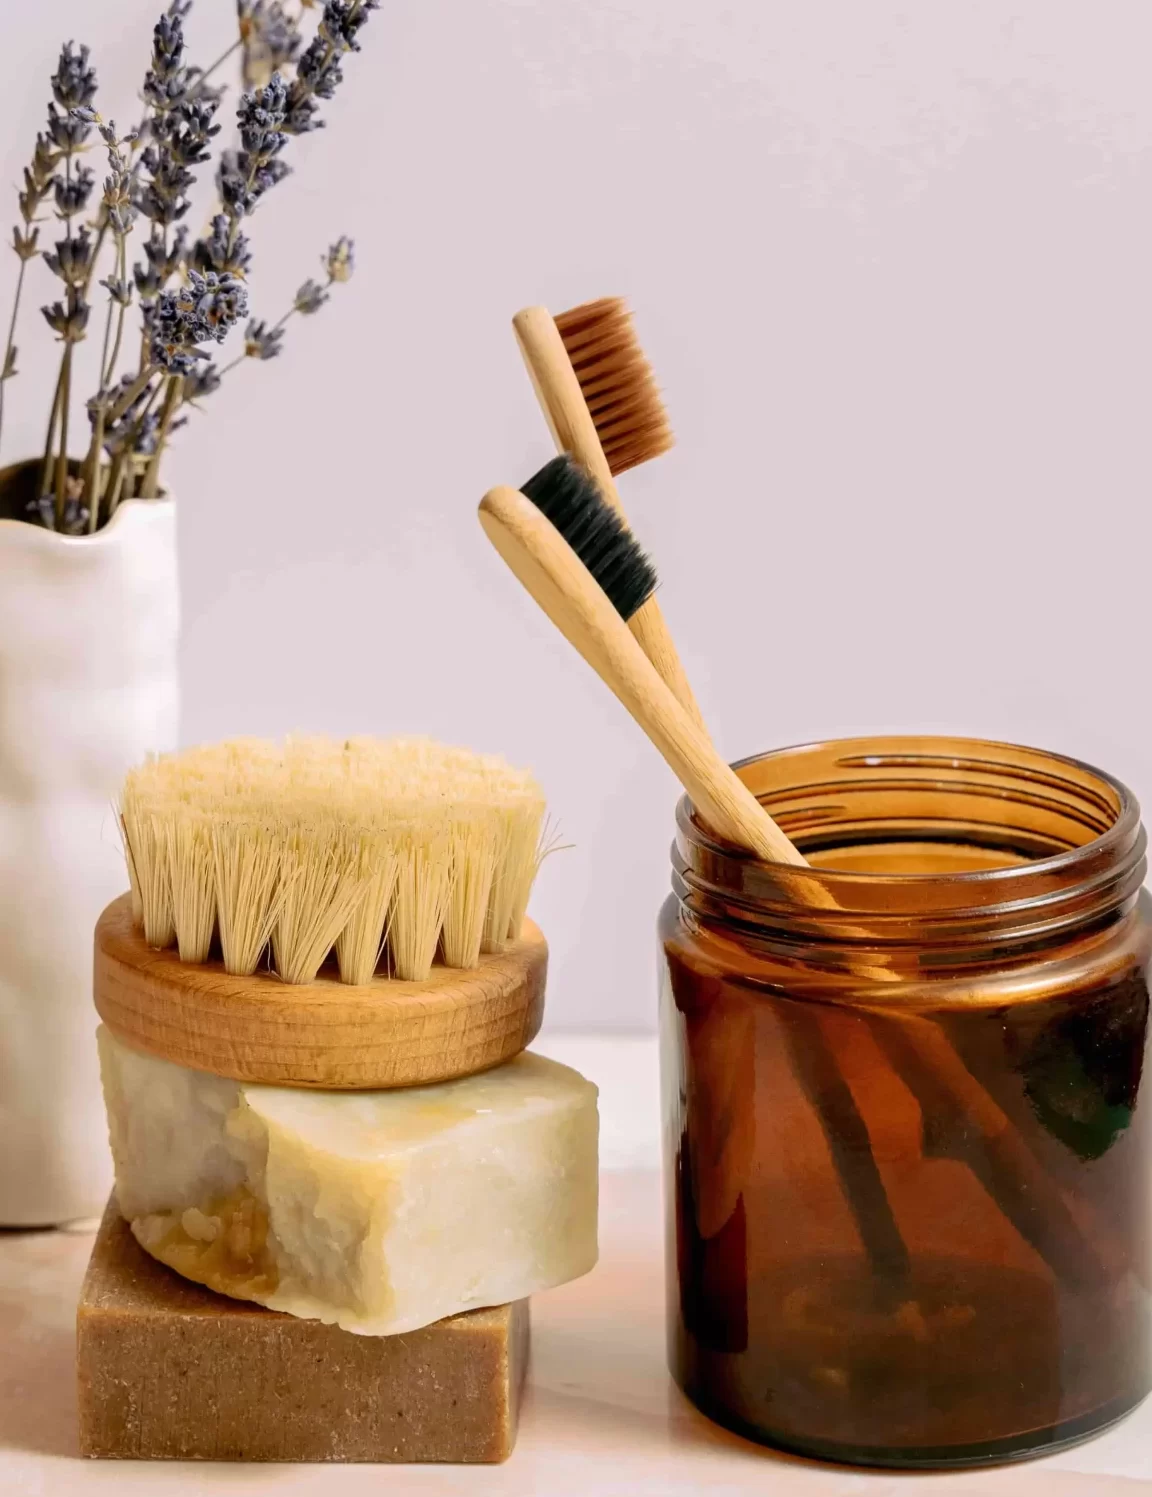 best ecofriendly products in kerala india toothbrush bamboo